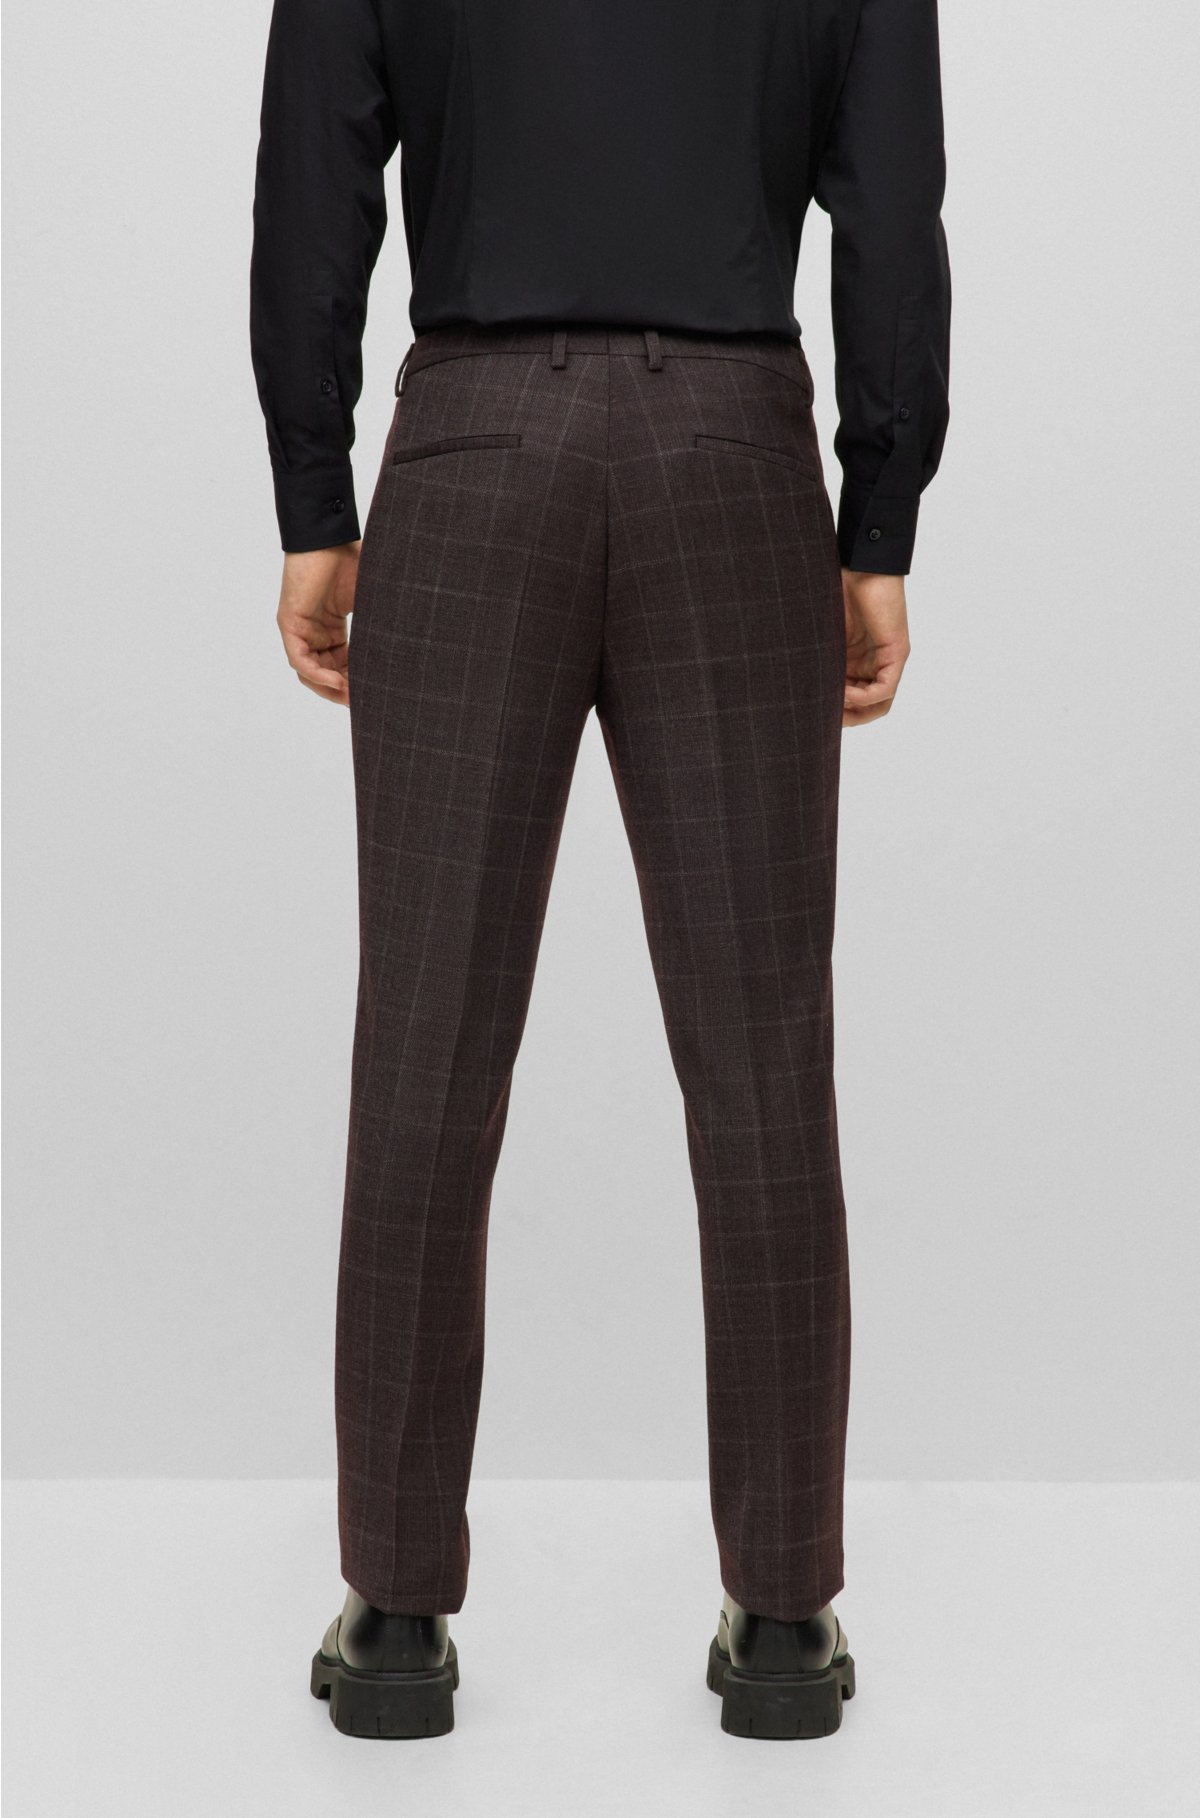 Extra-slim-fit suit in a checked wool blend, Dark Red